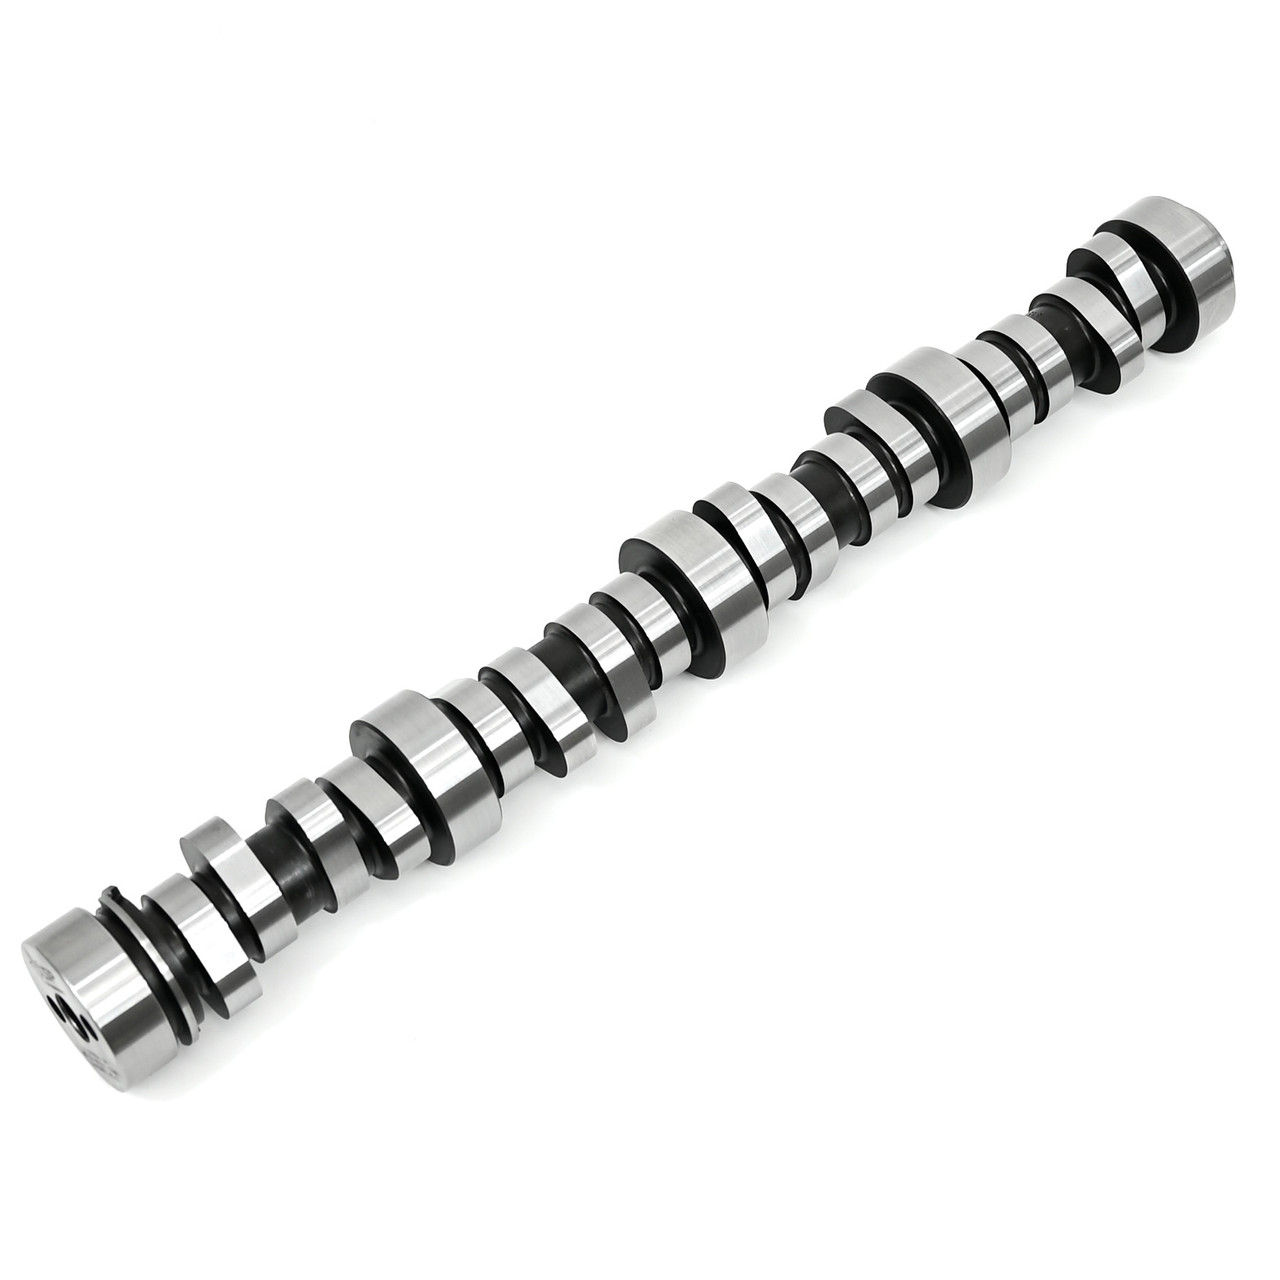 Texas Speed TSP Stage 4 Low Lift Truck Camshaft 4.8 5.3 6.0 6.2 LS 1999-2013 Cam Kit